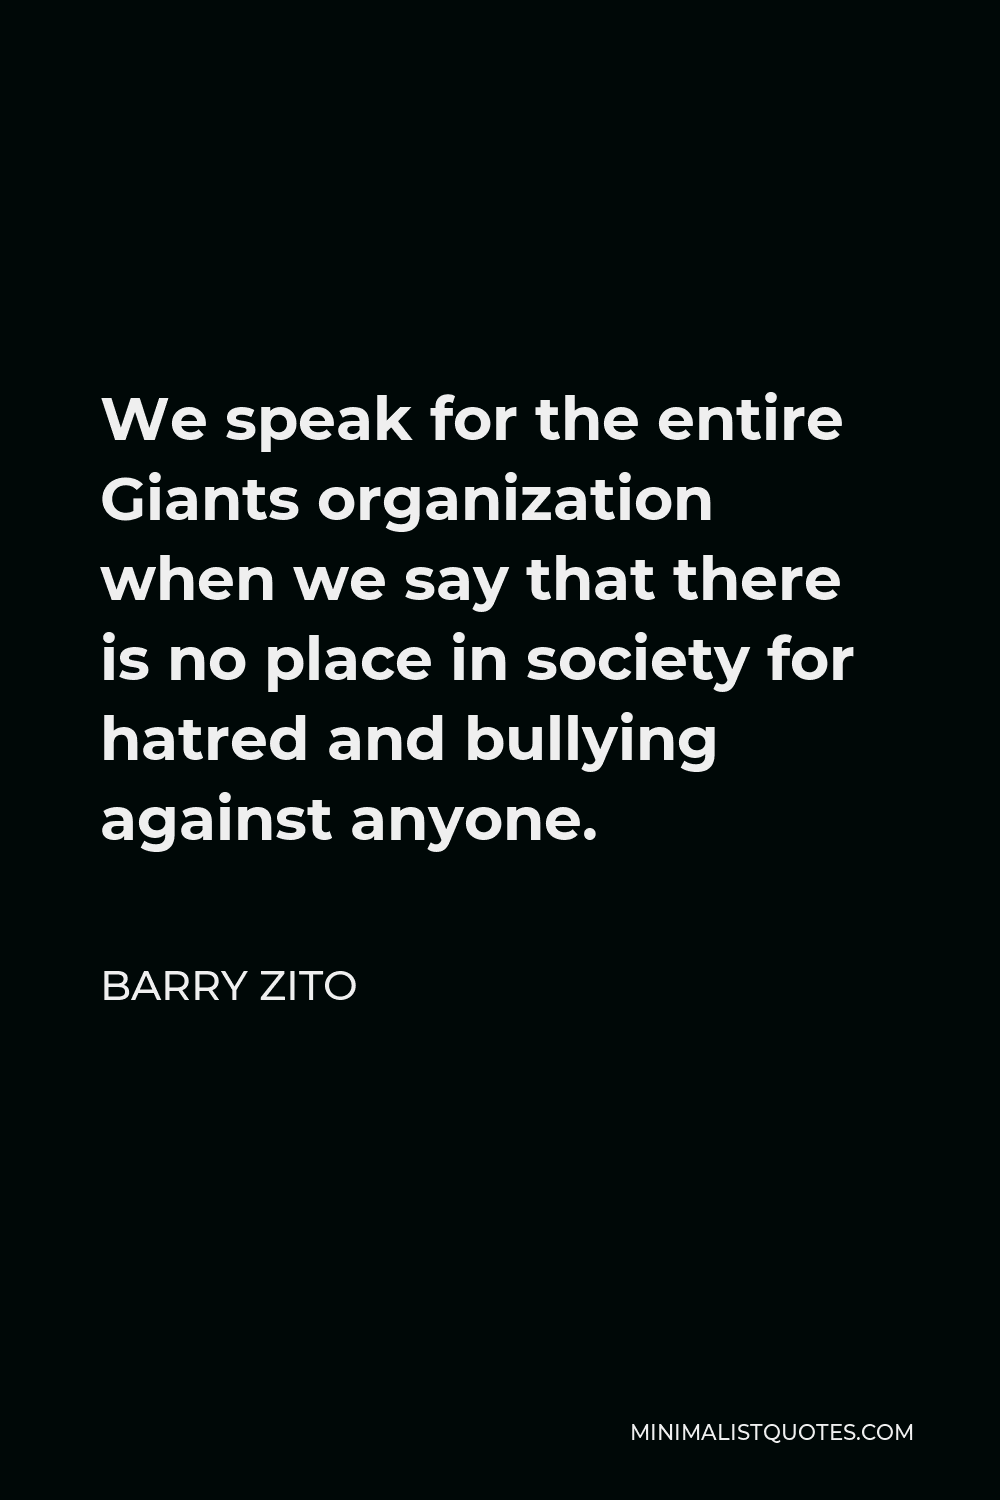 Barry Zito Quote - We speak for the entire Giants organization when we say that there is no place in society for hatred and bullying against anyone.